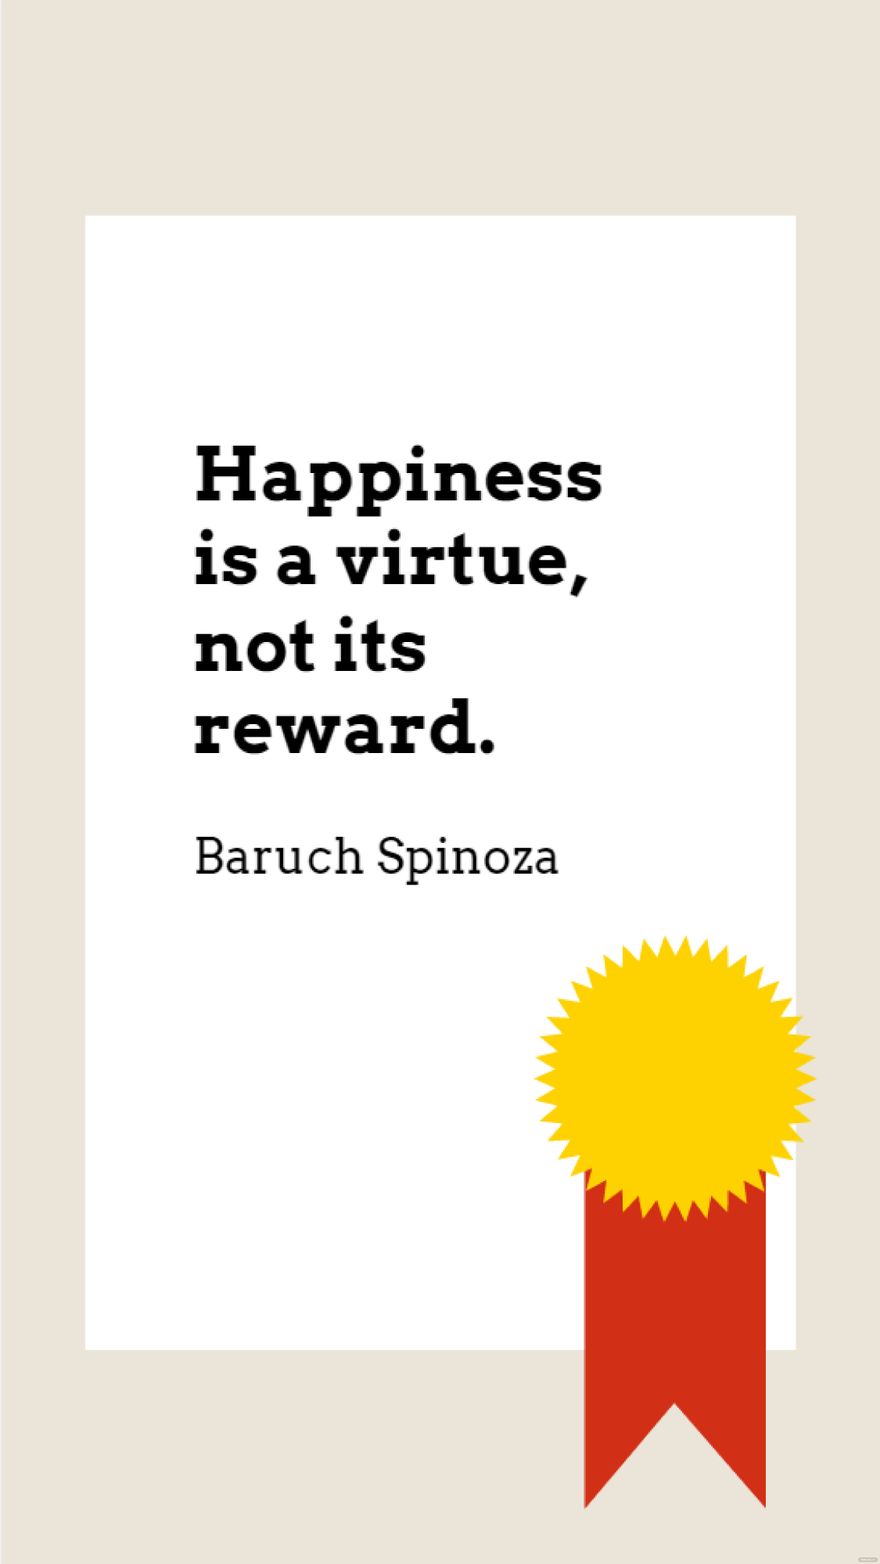 Free Baruch Spinoza - Happiness is a virtue, not its reward. in JPG